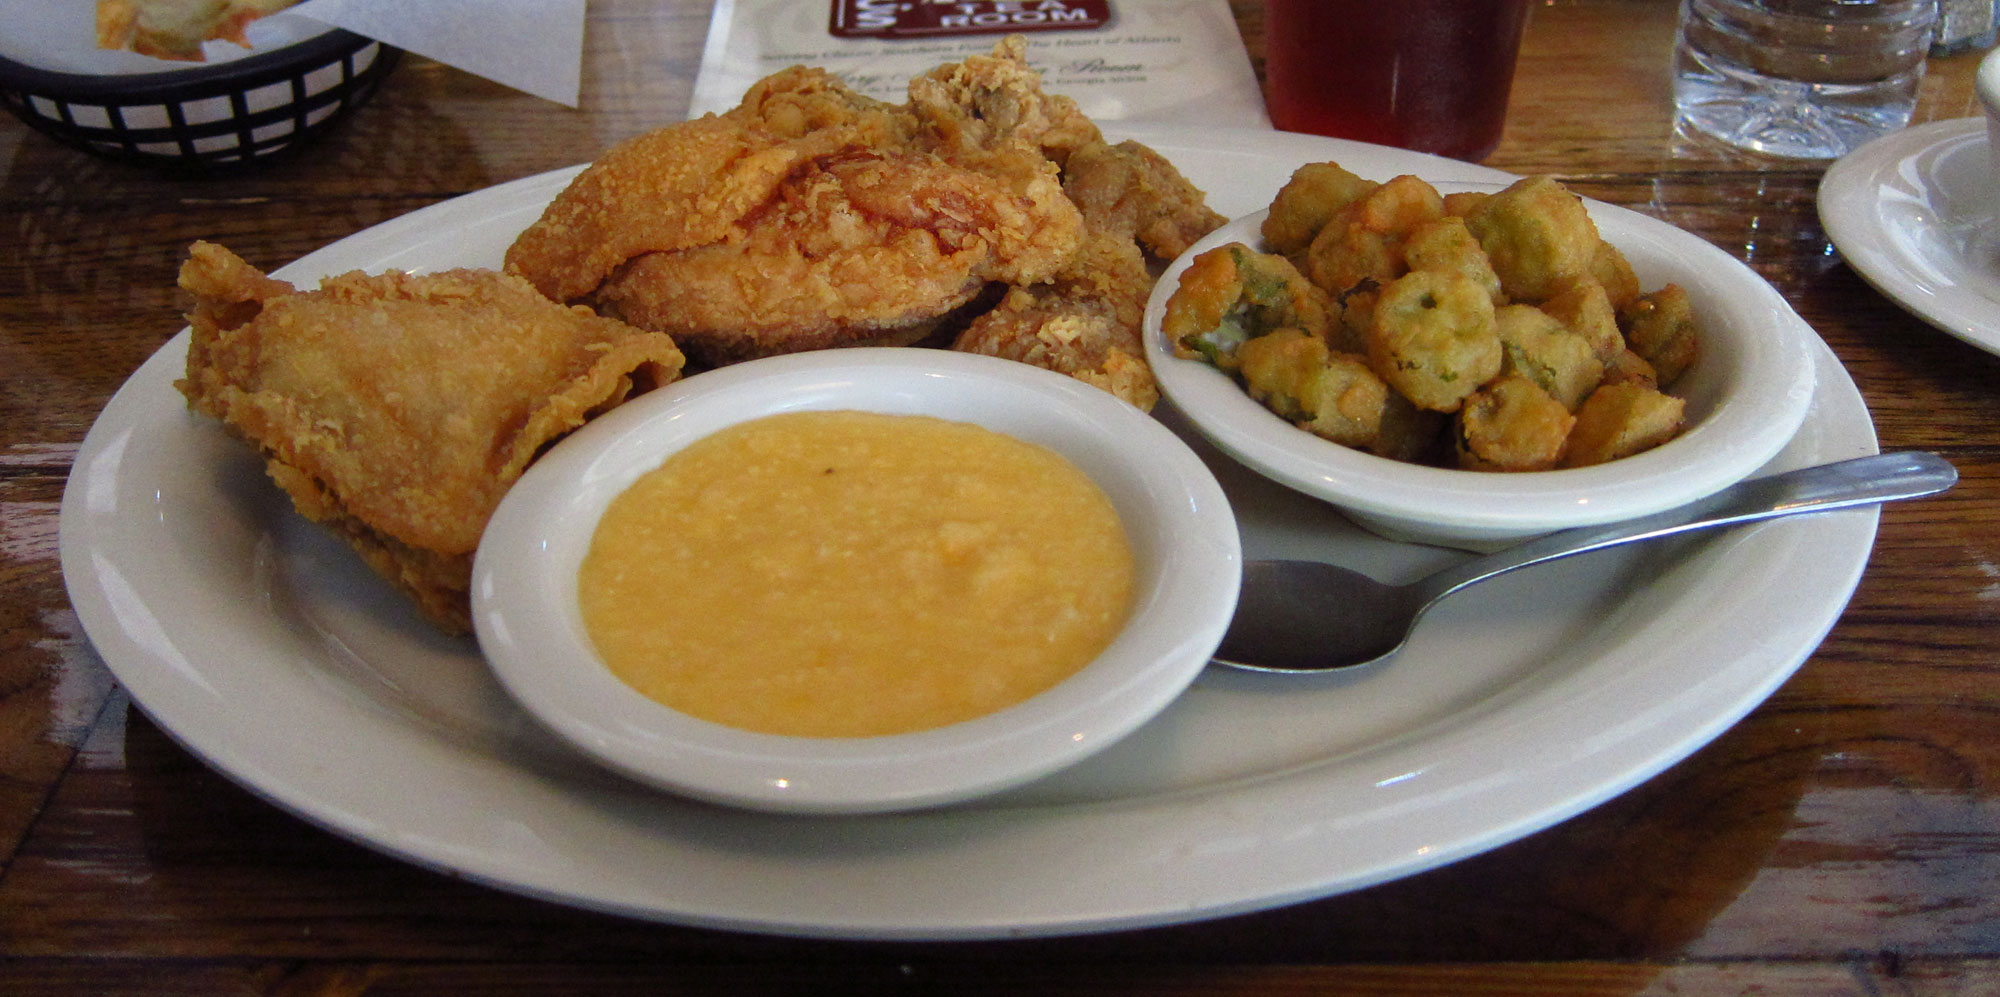 Photograph of a meal at a restaurant in Atlanta, Georgia, U.S.A. The photo shows a round white plate with pieces of breaded, fried chicken, a bowl of breaded, fried okra, and a bowl of grits sitting on it. 